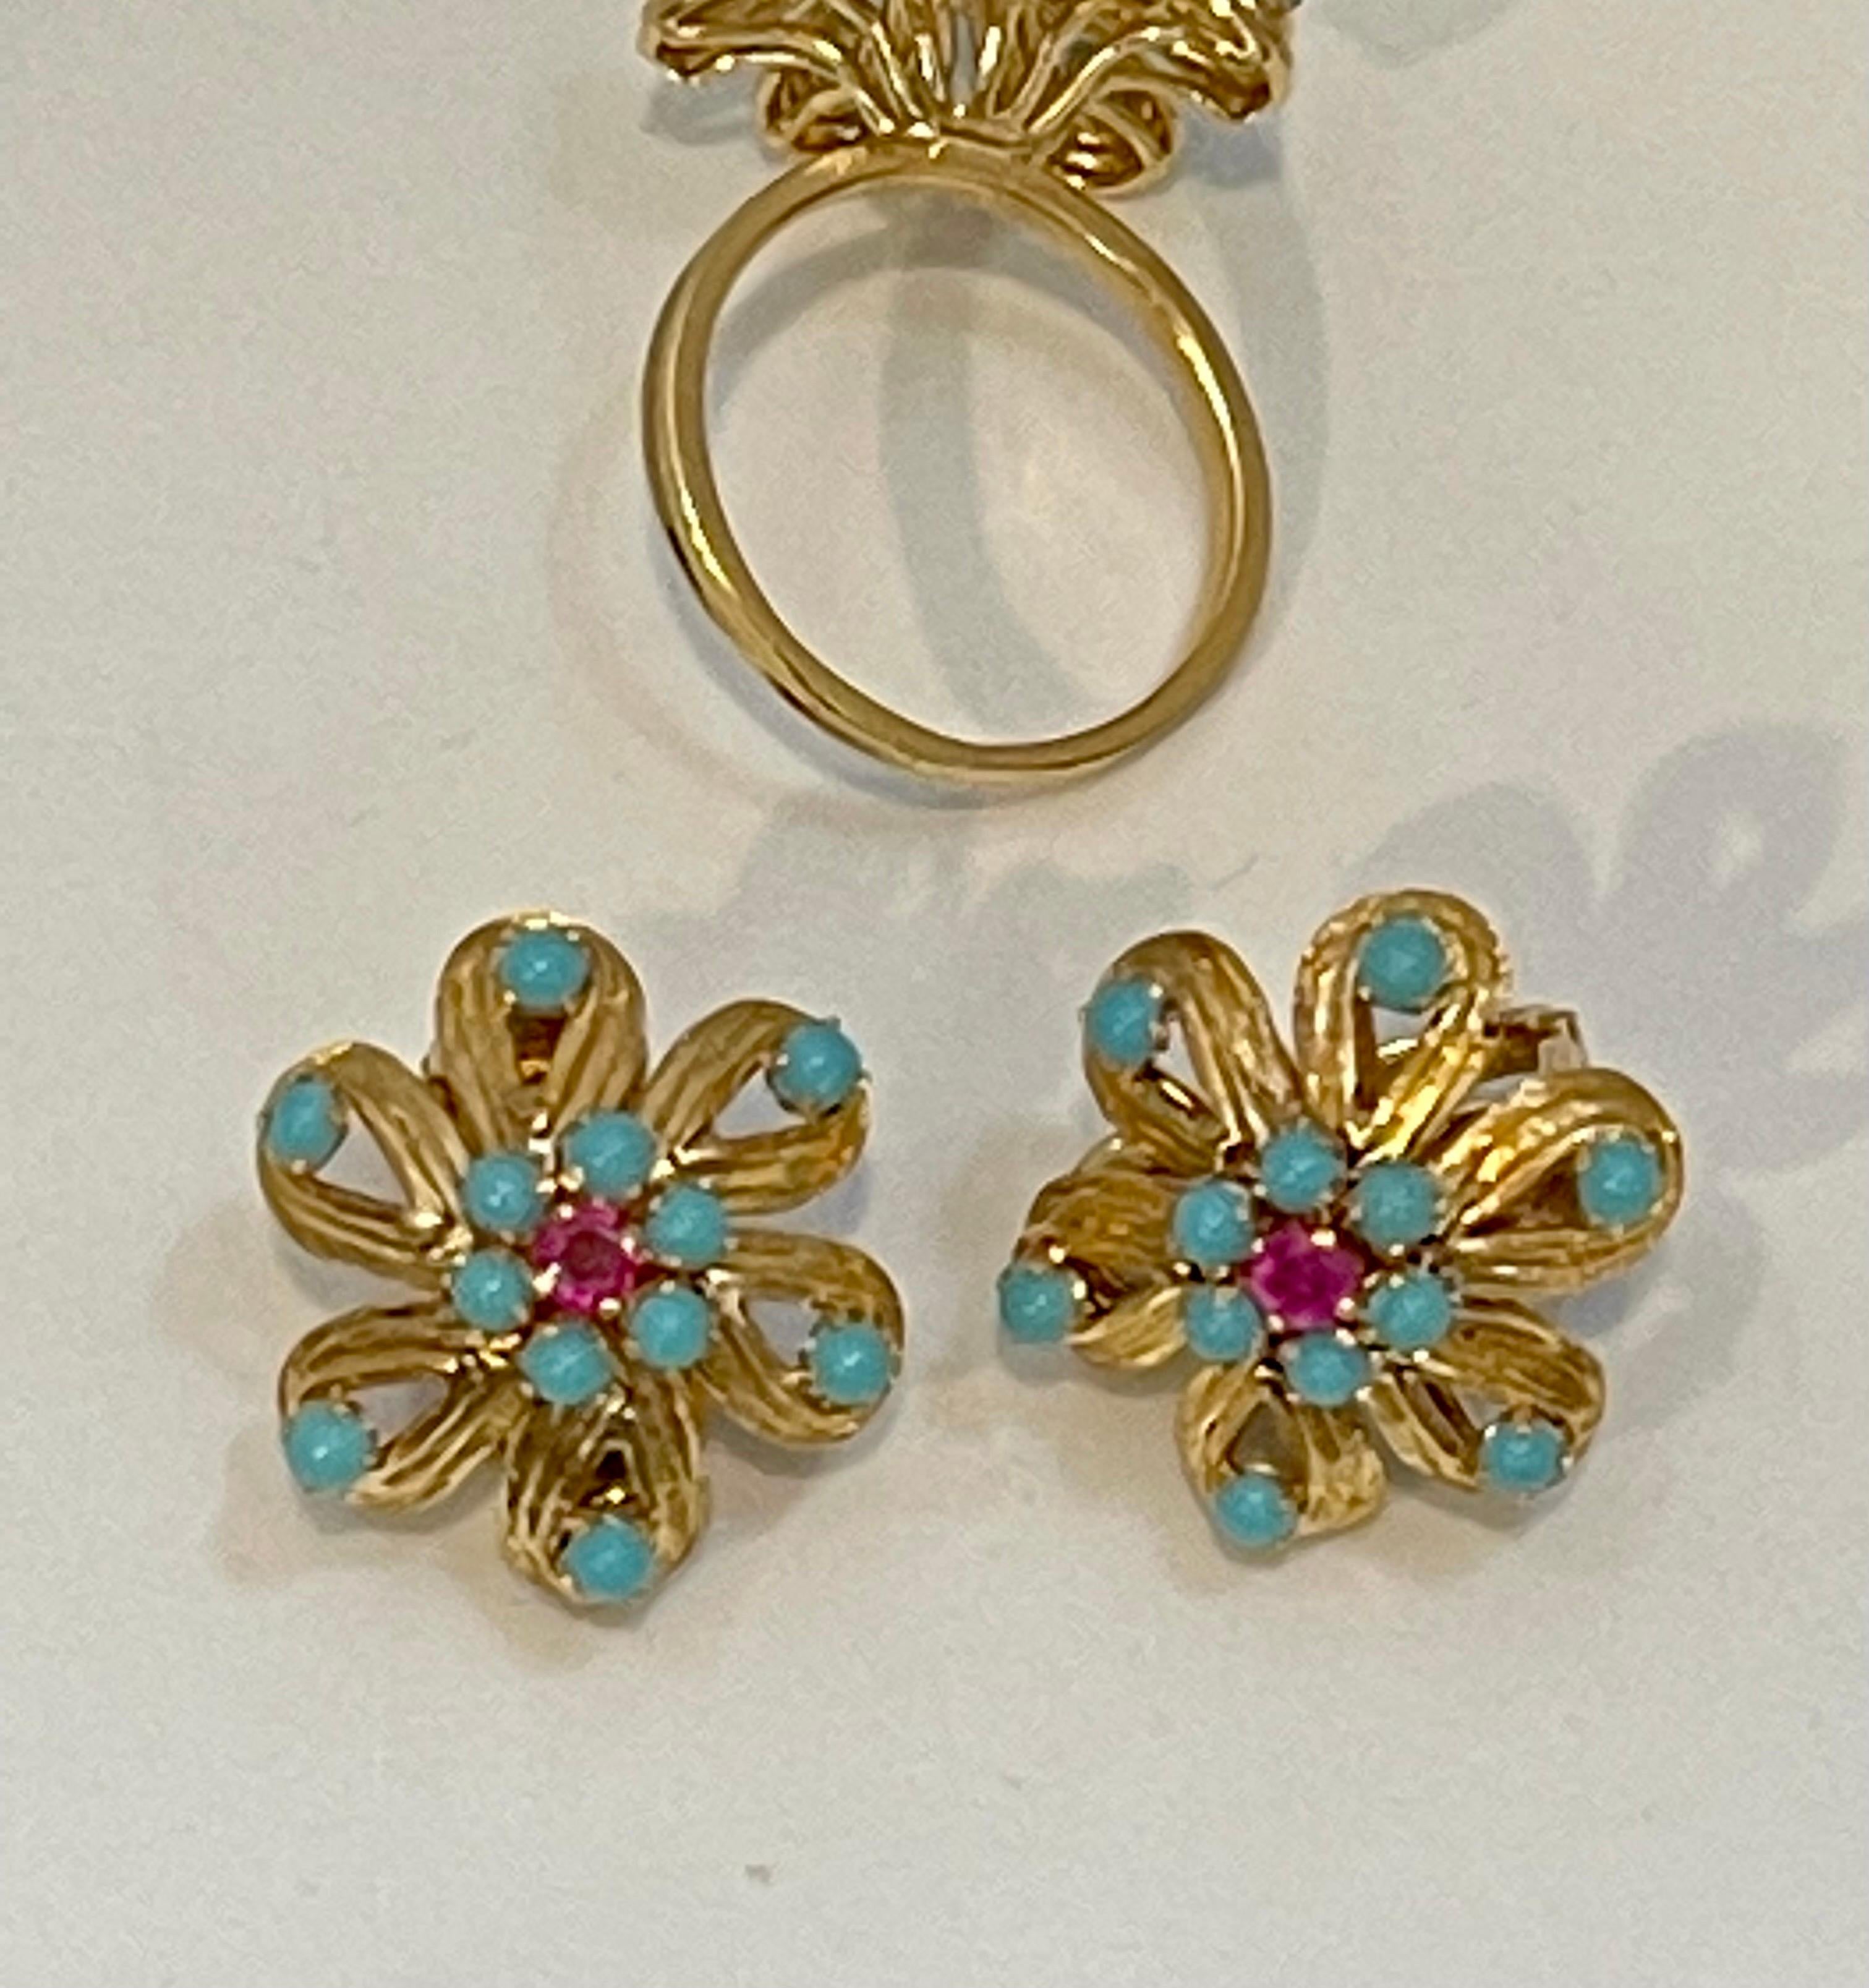 4 Ct Natural Turquoise & Ruby 18 Kt Yellow Gold Flower Ring & Earring Set 20Gm In Excellent Condition For Sale In New York, NY